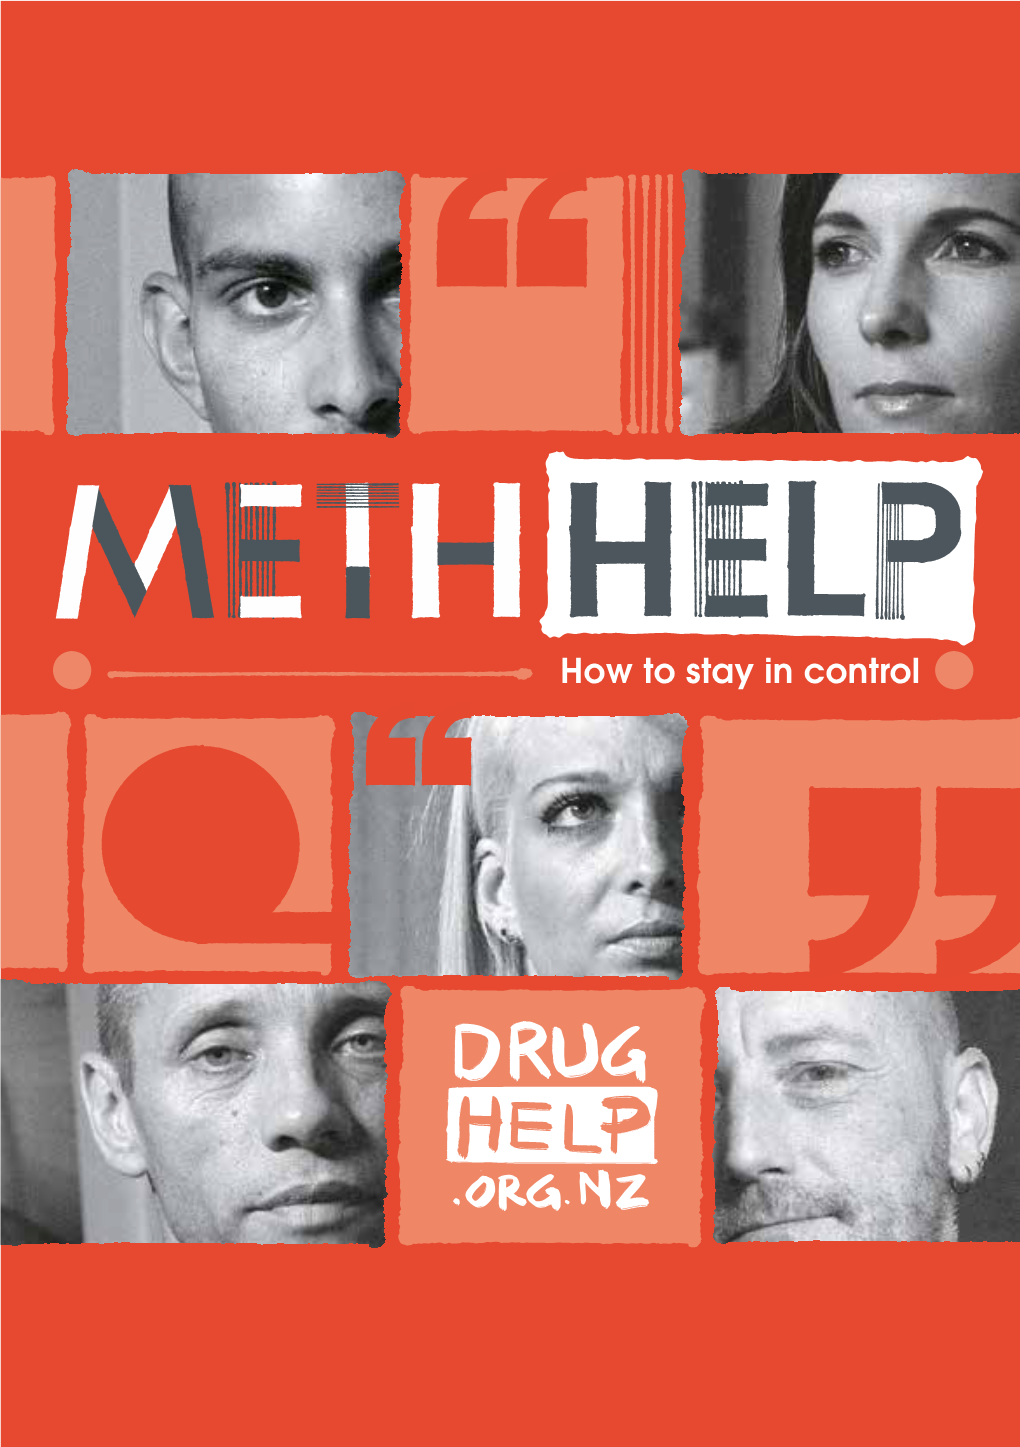 Methhelp: How to Stay in Control (July 2018 Update)